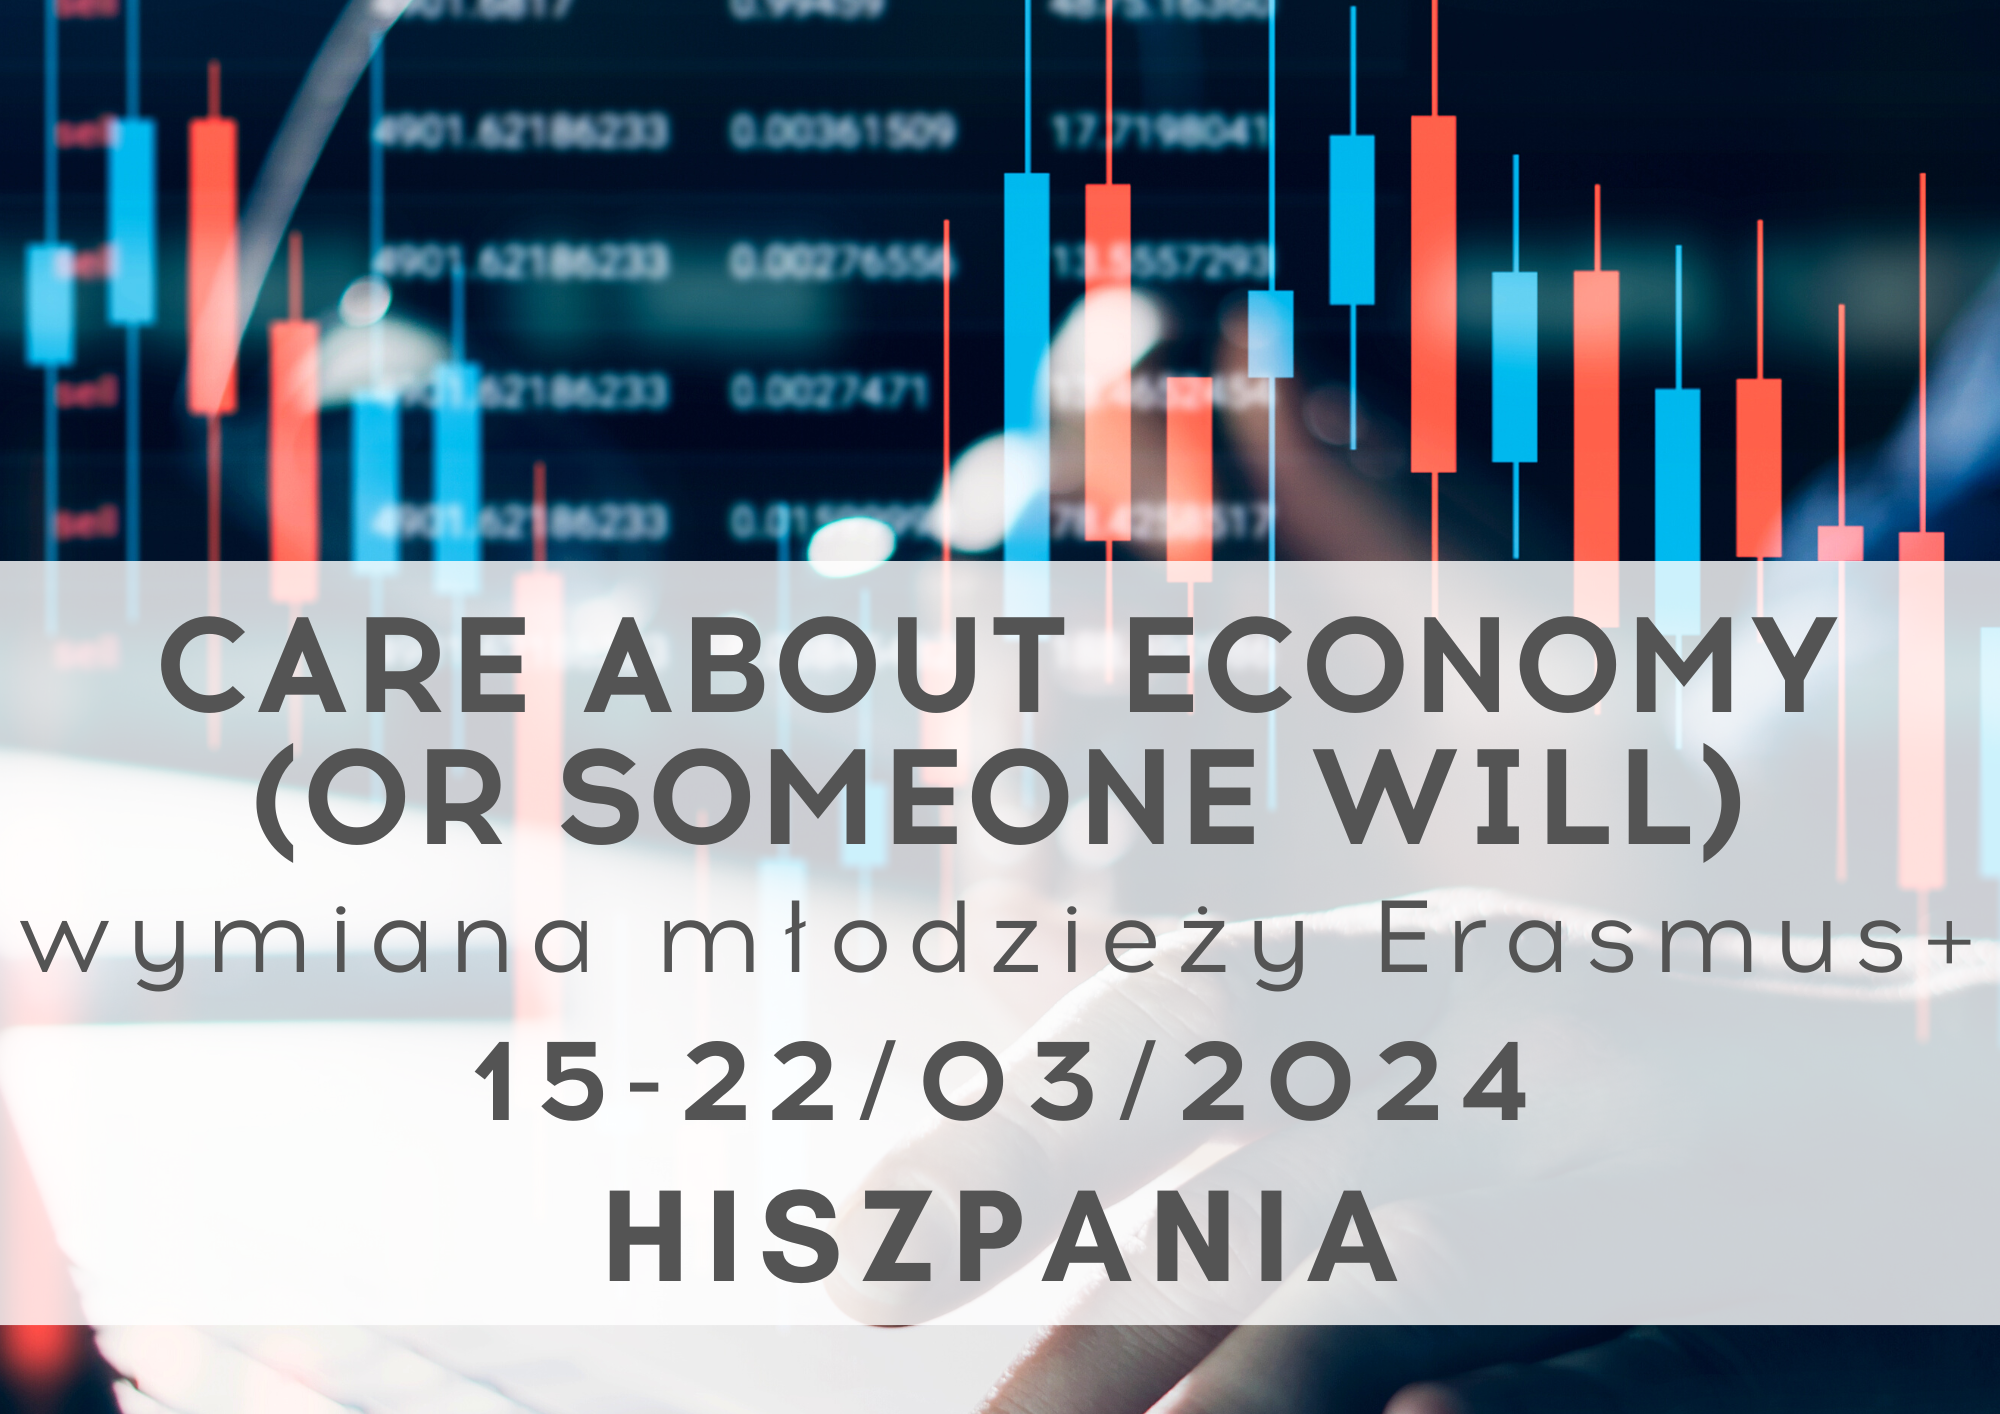 Erasmus+ Youth Exchange CARE ABOUT ECONOMY 15-22.03.2024